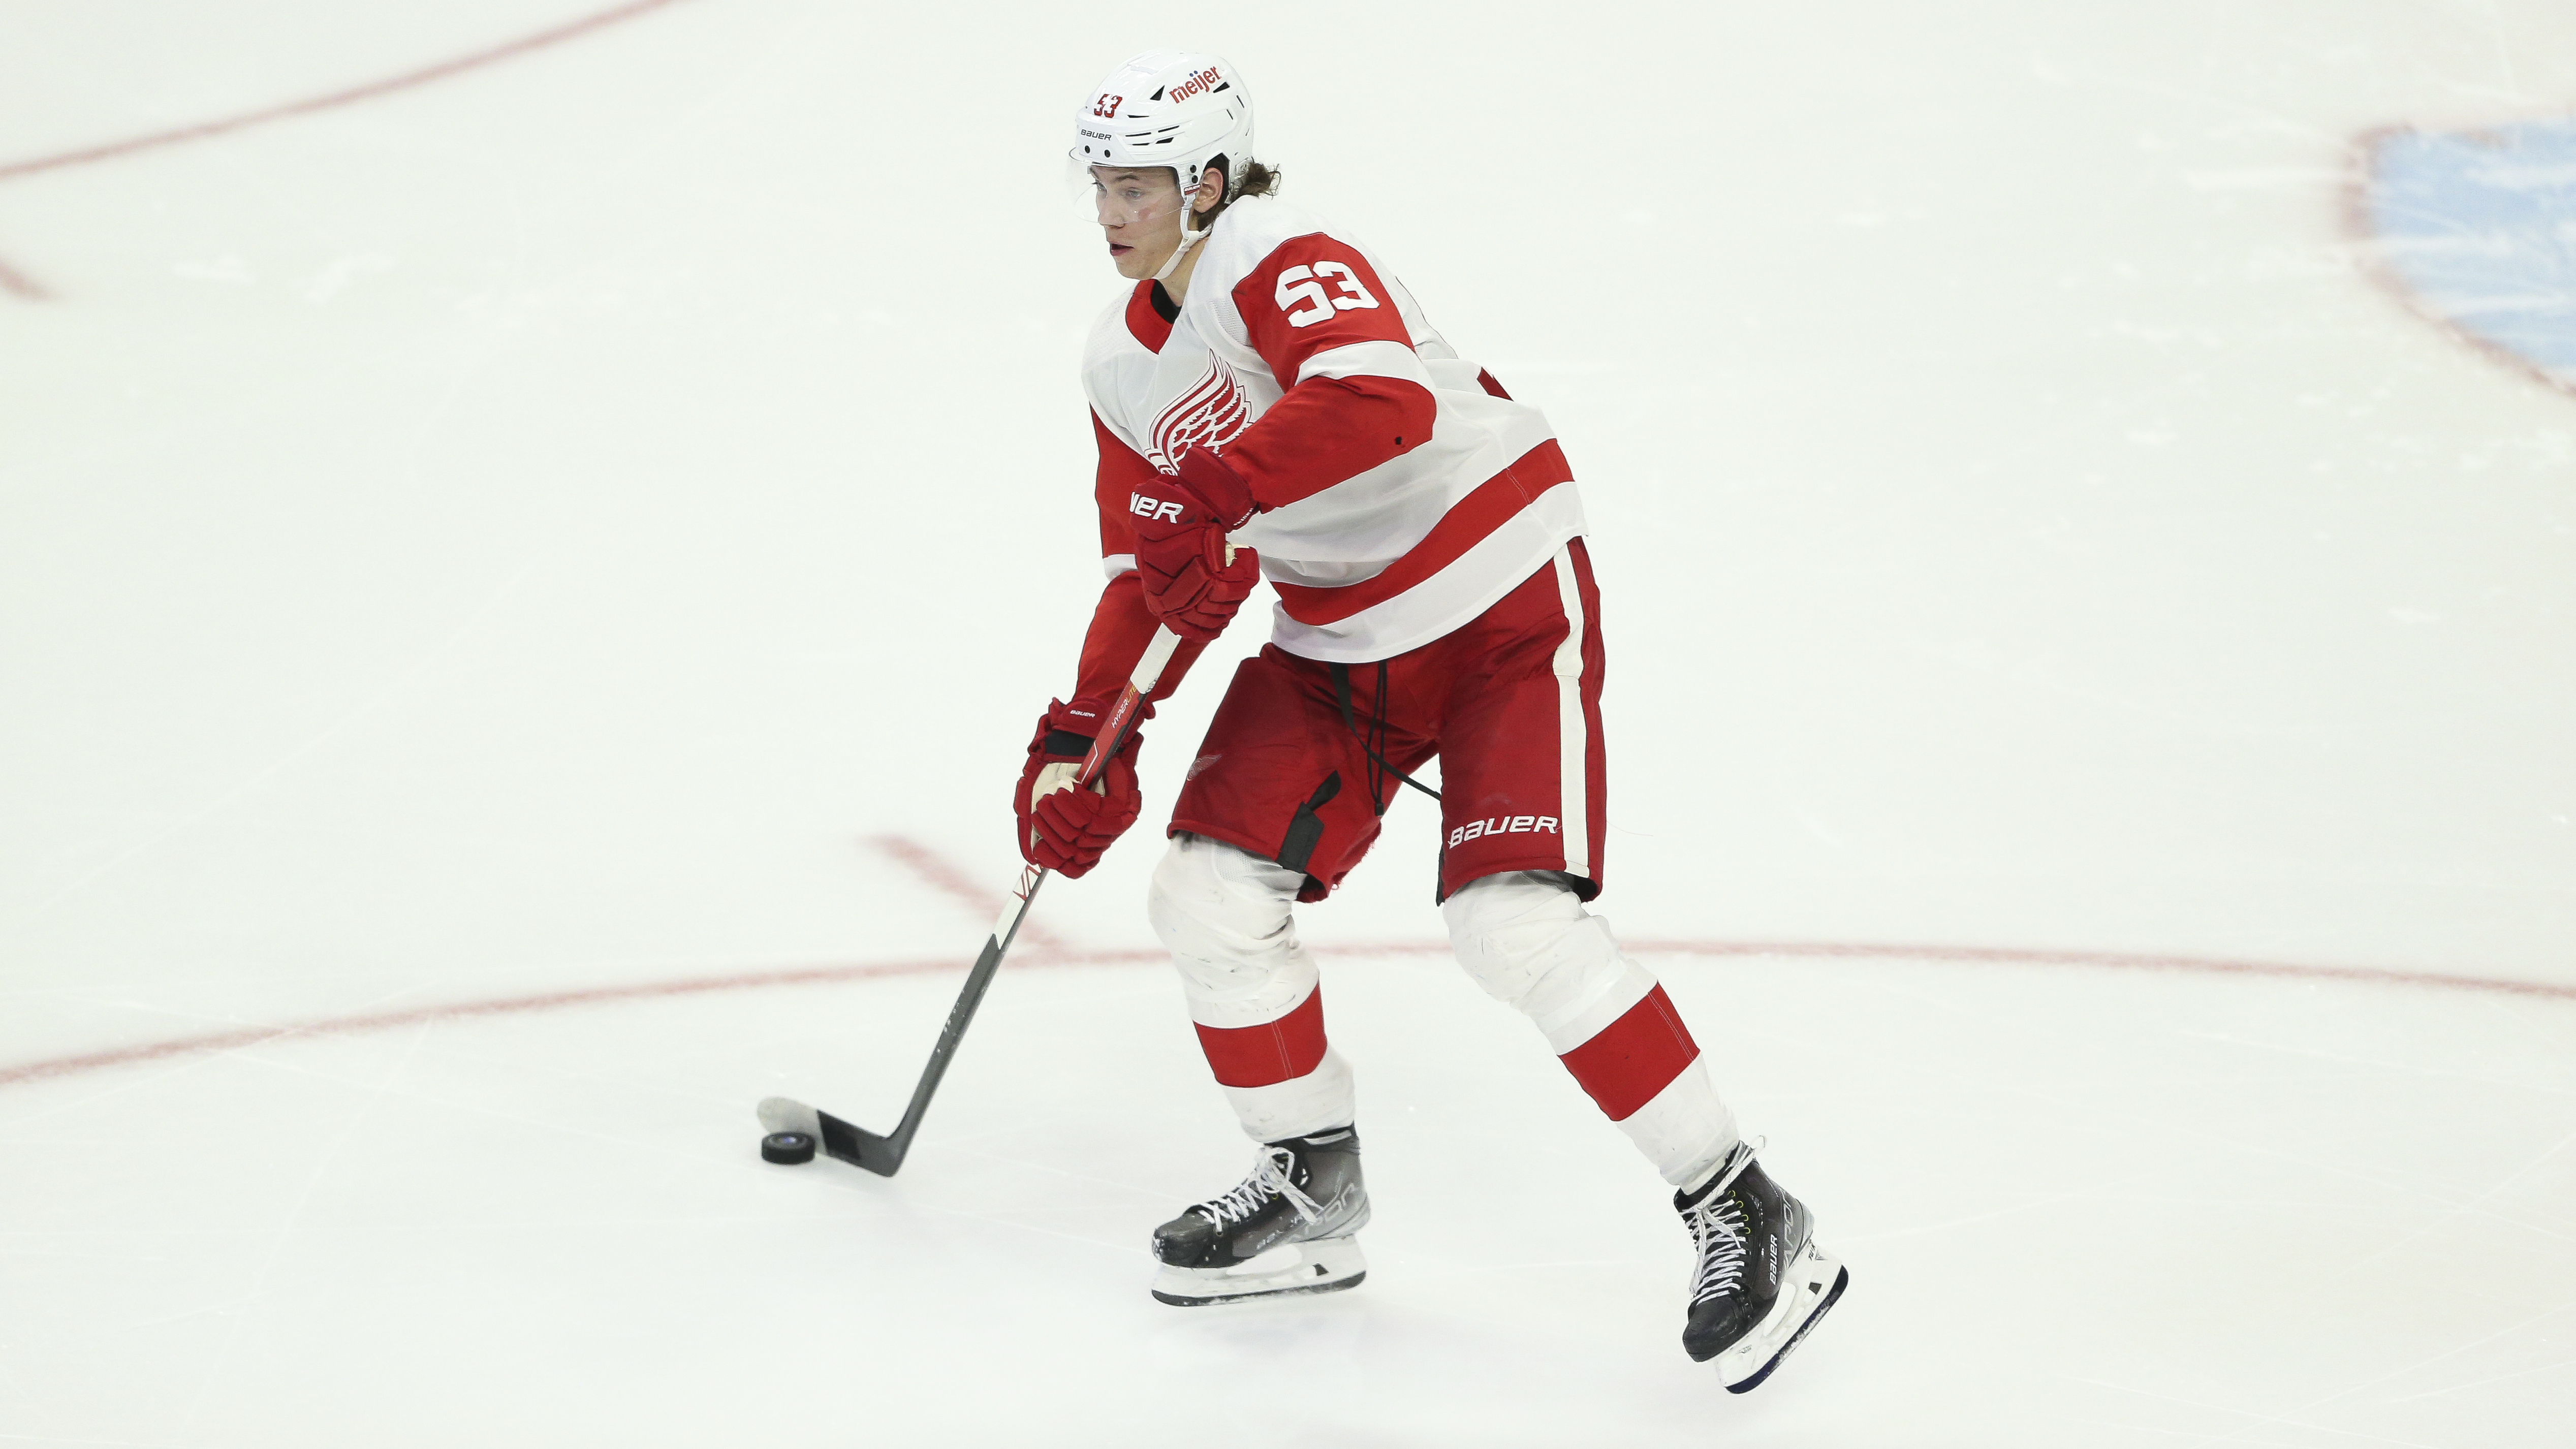 Jakub Vrana opens up about departure from Red Wings - HockeyFeed